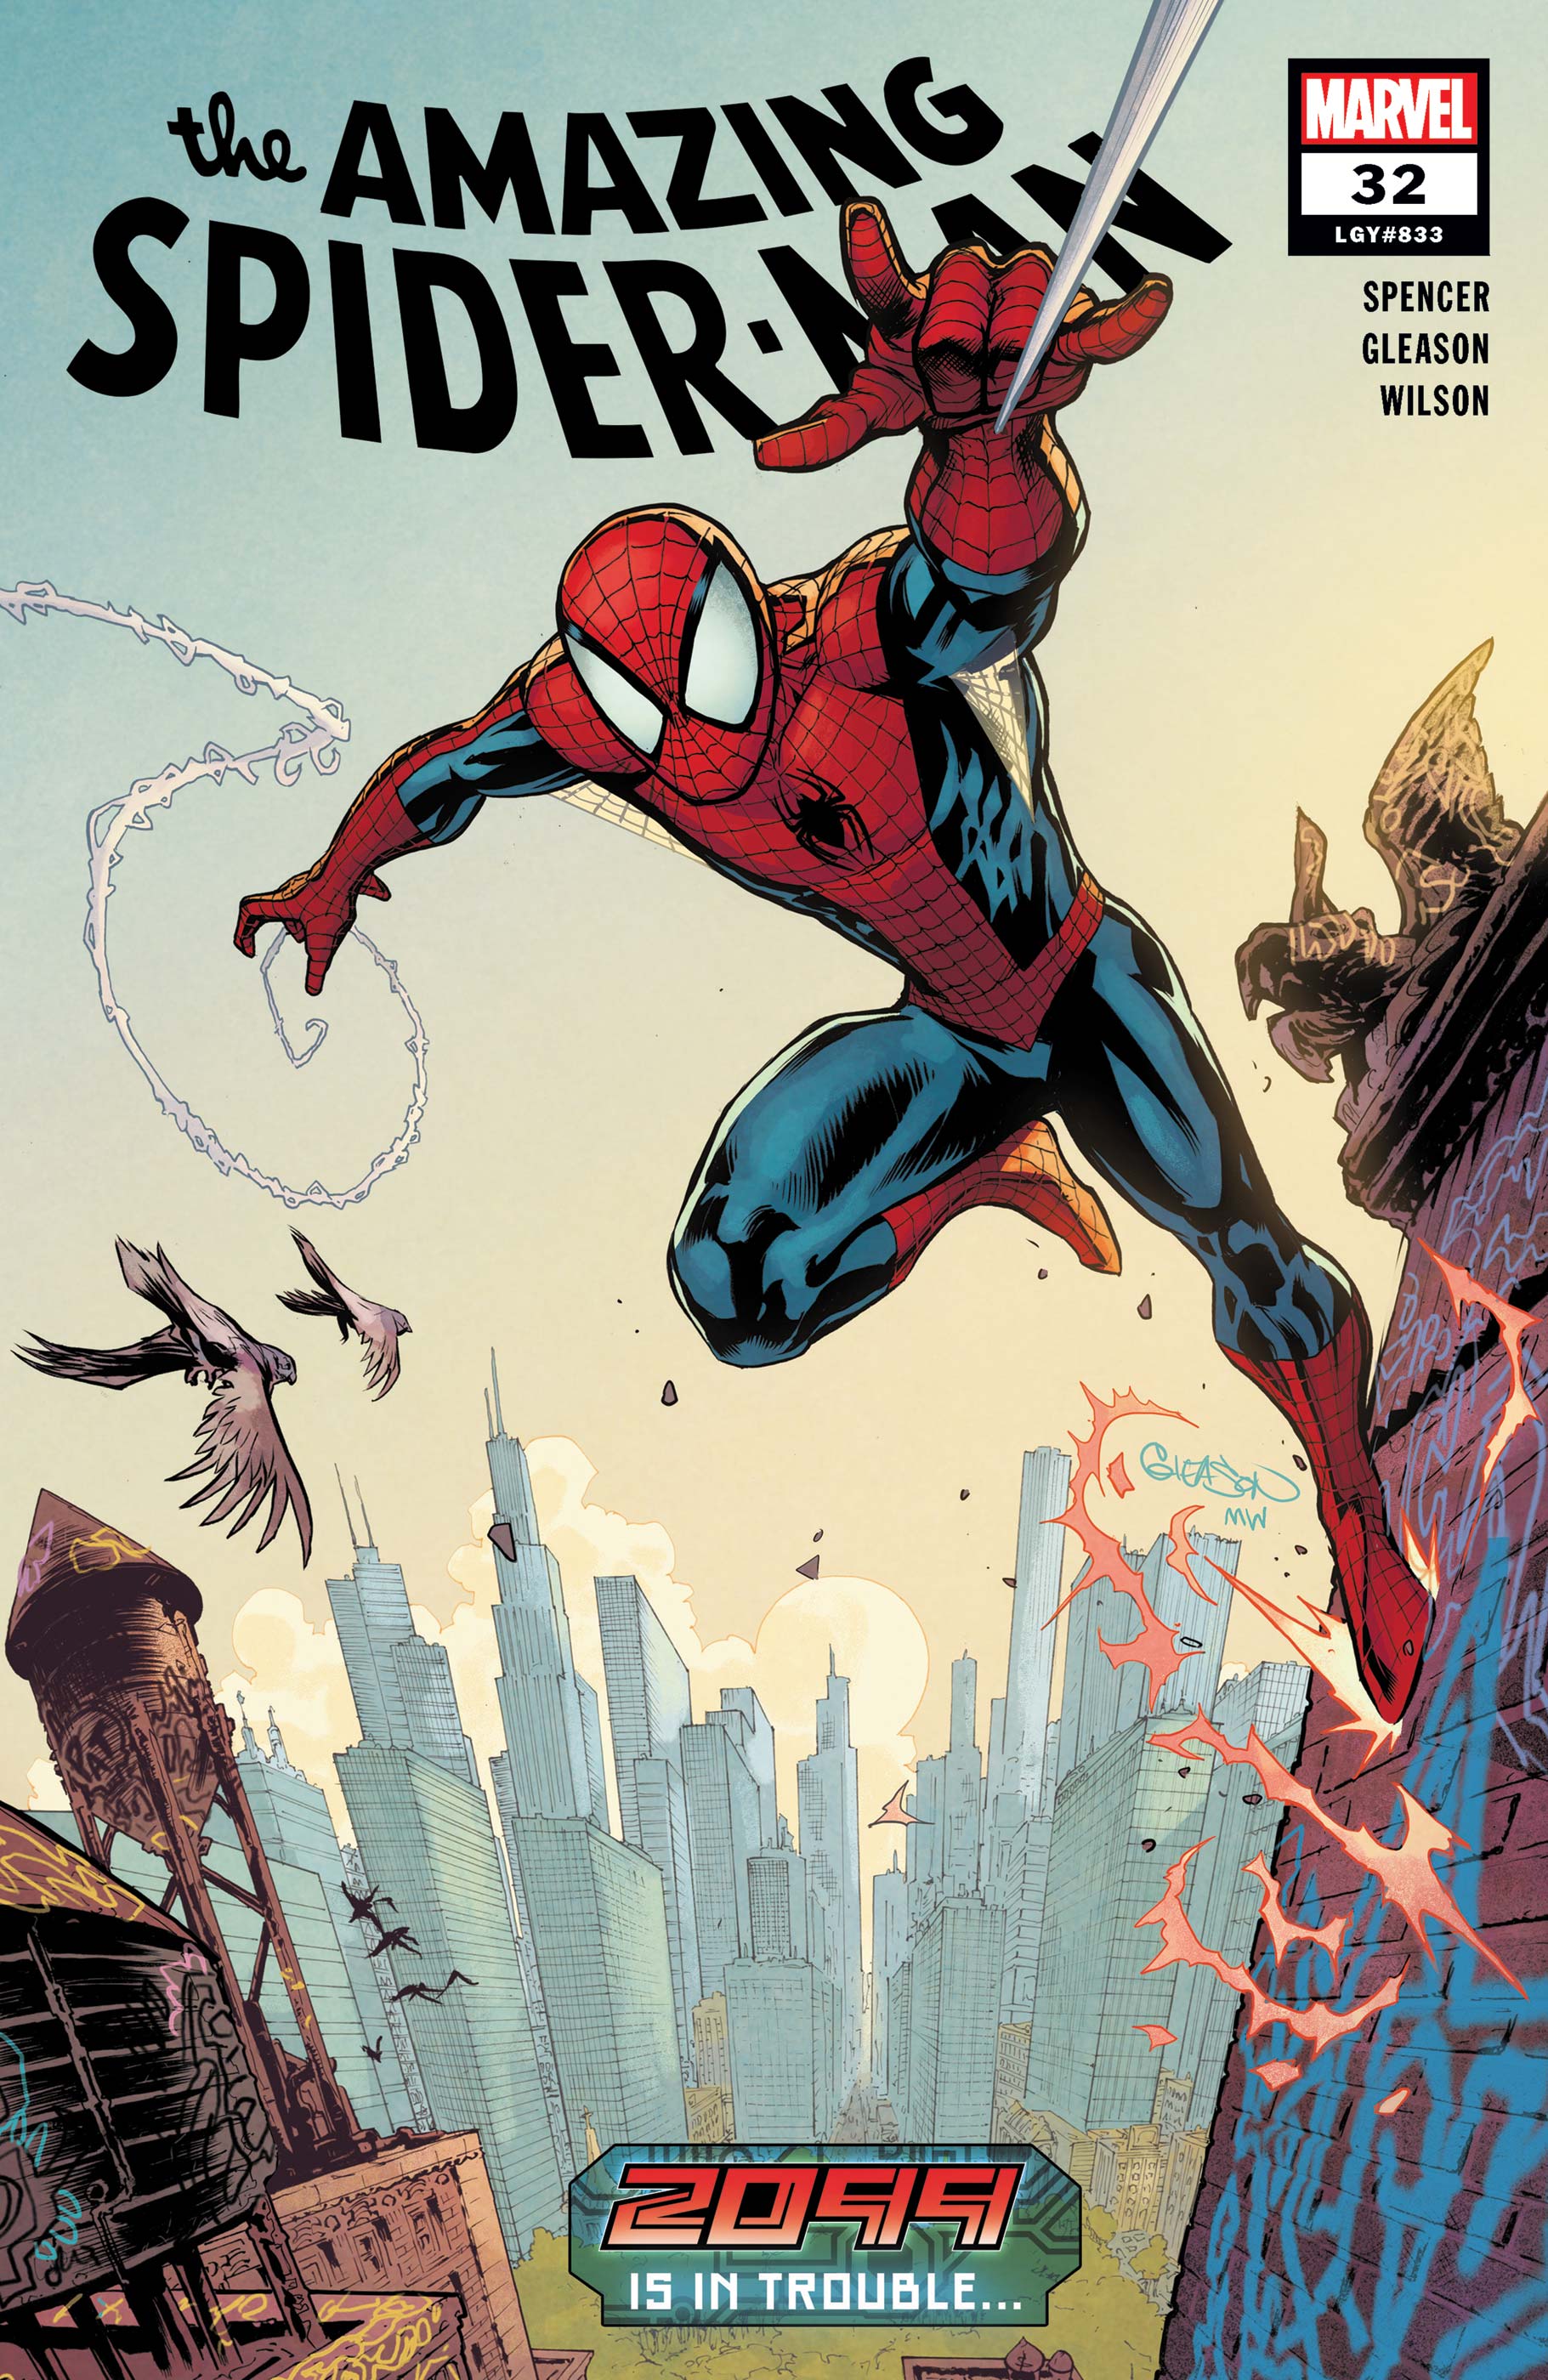 The Amazing Spider-Man (2018) #32 | Comic Issues | Marvel